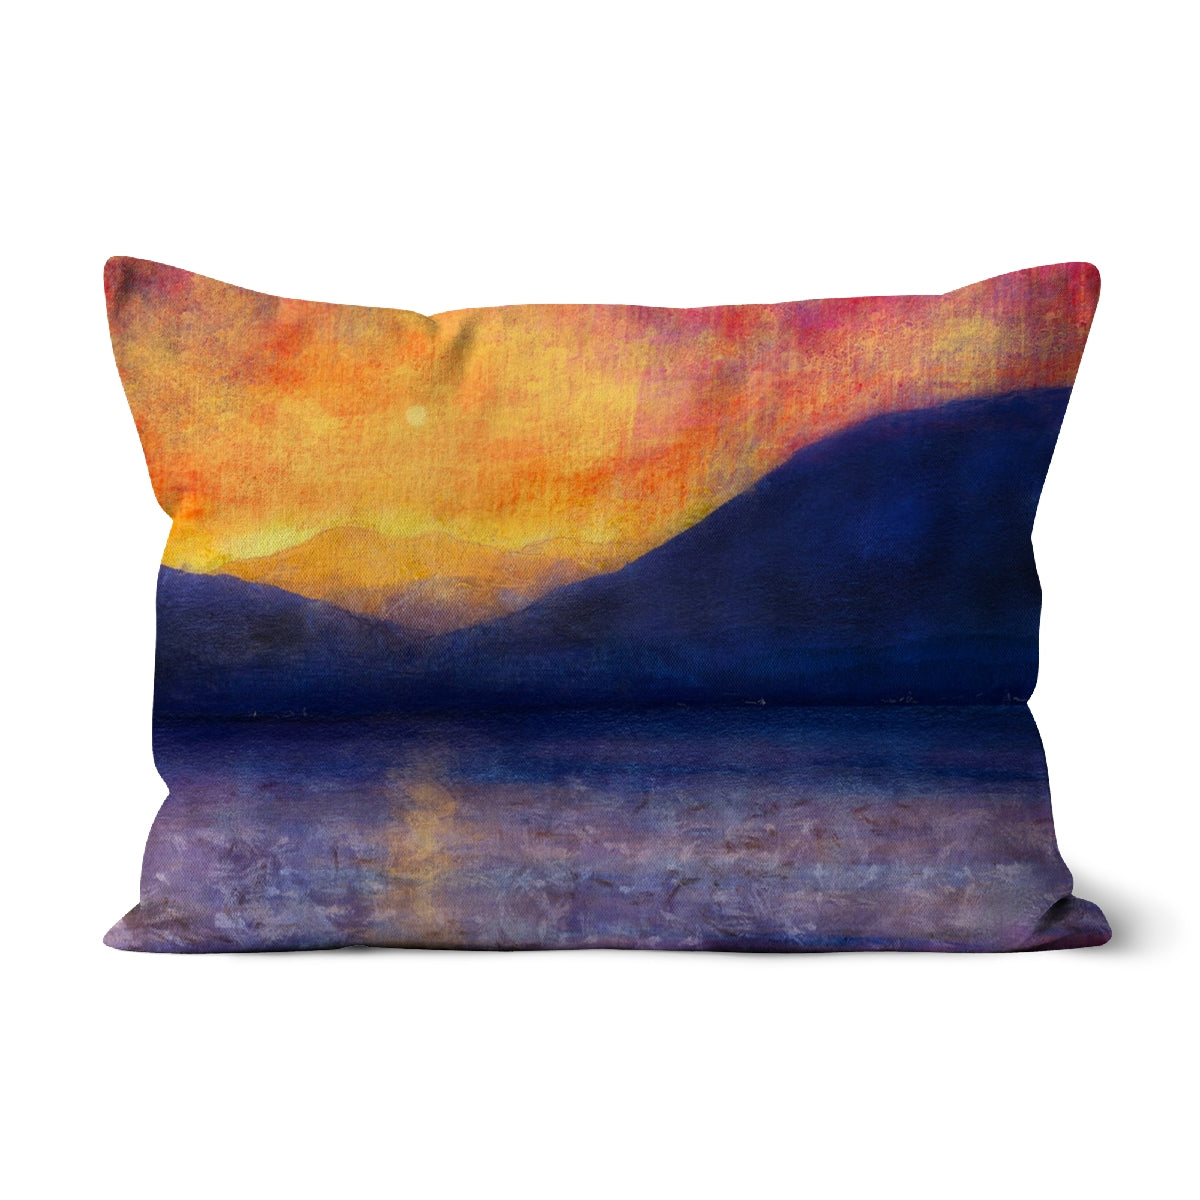 Sunset Approaching Mull Art Gifts Cushion-Cushions-Hebridean Islands Art Gallery-Canvas-19"x13"-Paintings, Prints, Homeware, Art Gifts From Scotland By Scottish Artist Kevin Hunter